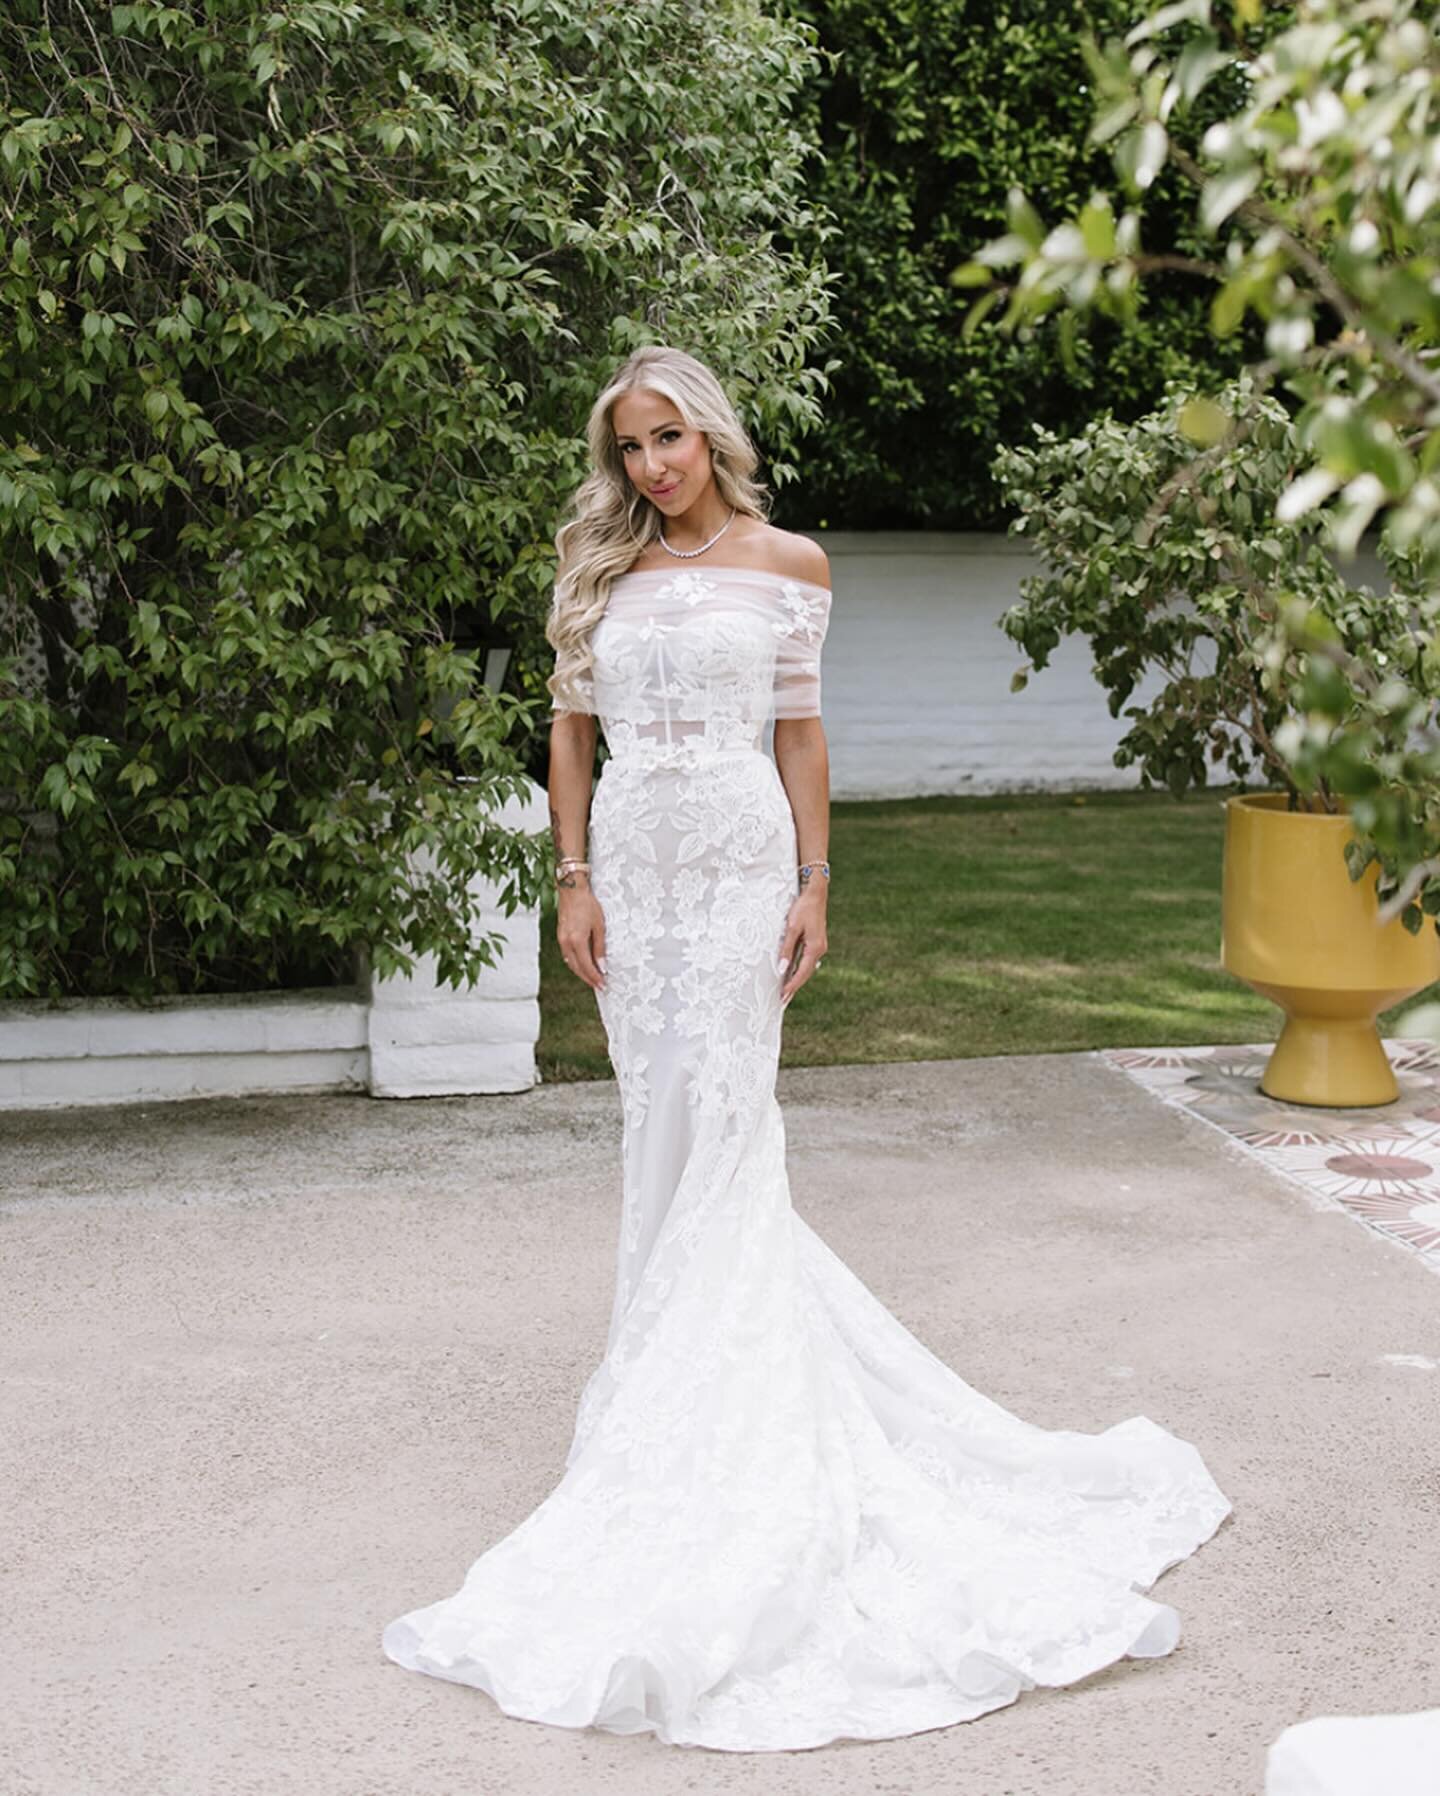 Gorgeous in our Nicole Wrap 💕 @paigeraszlmahoney 

Give your strapless gown two looks with this perfect tulle and lace wrap 

@sydneynoellephoto 

#bridalaccessories #bridalwrap #straplessgown #aislestyle #palmspringswedding #tullewrap